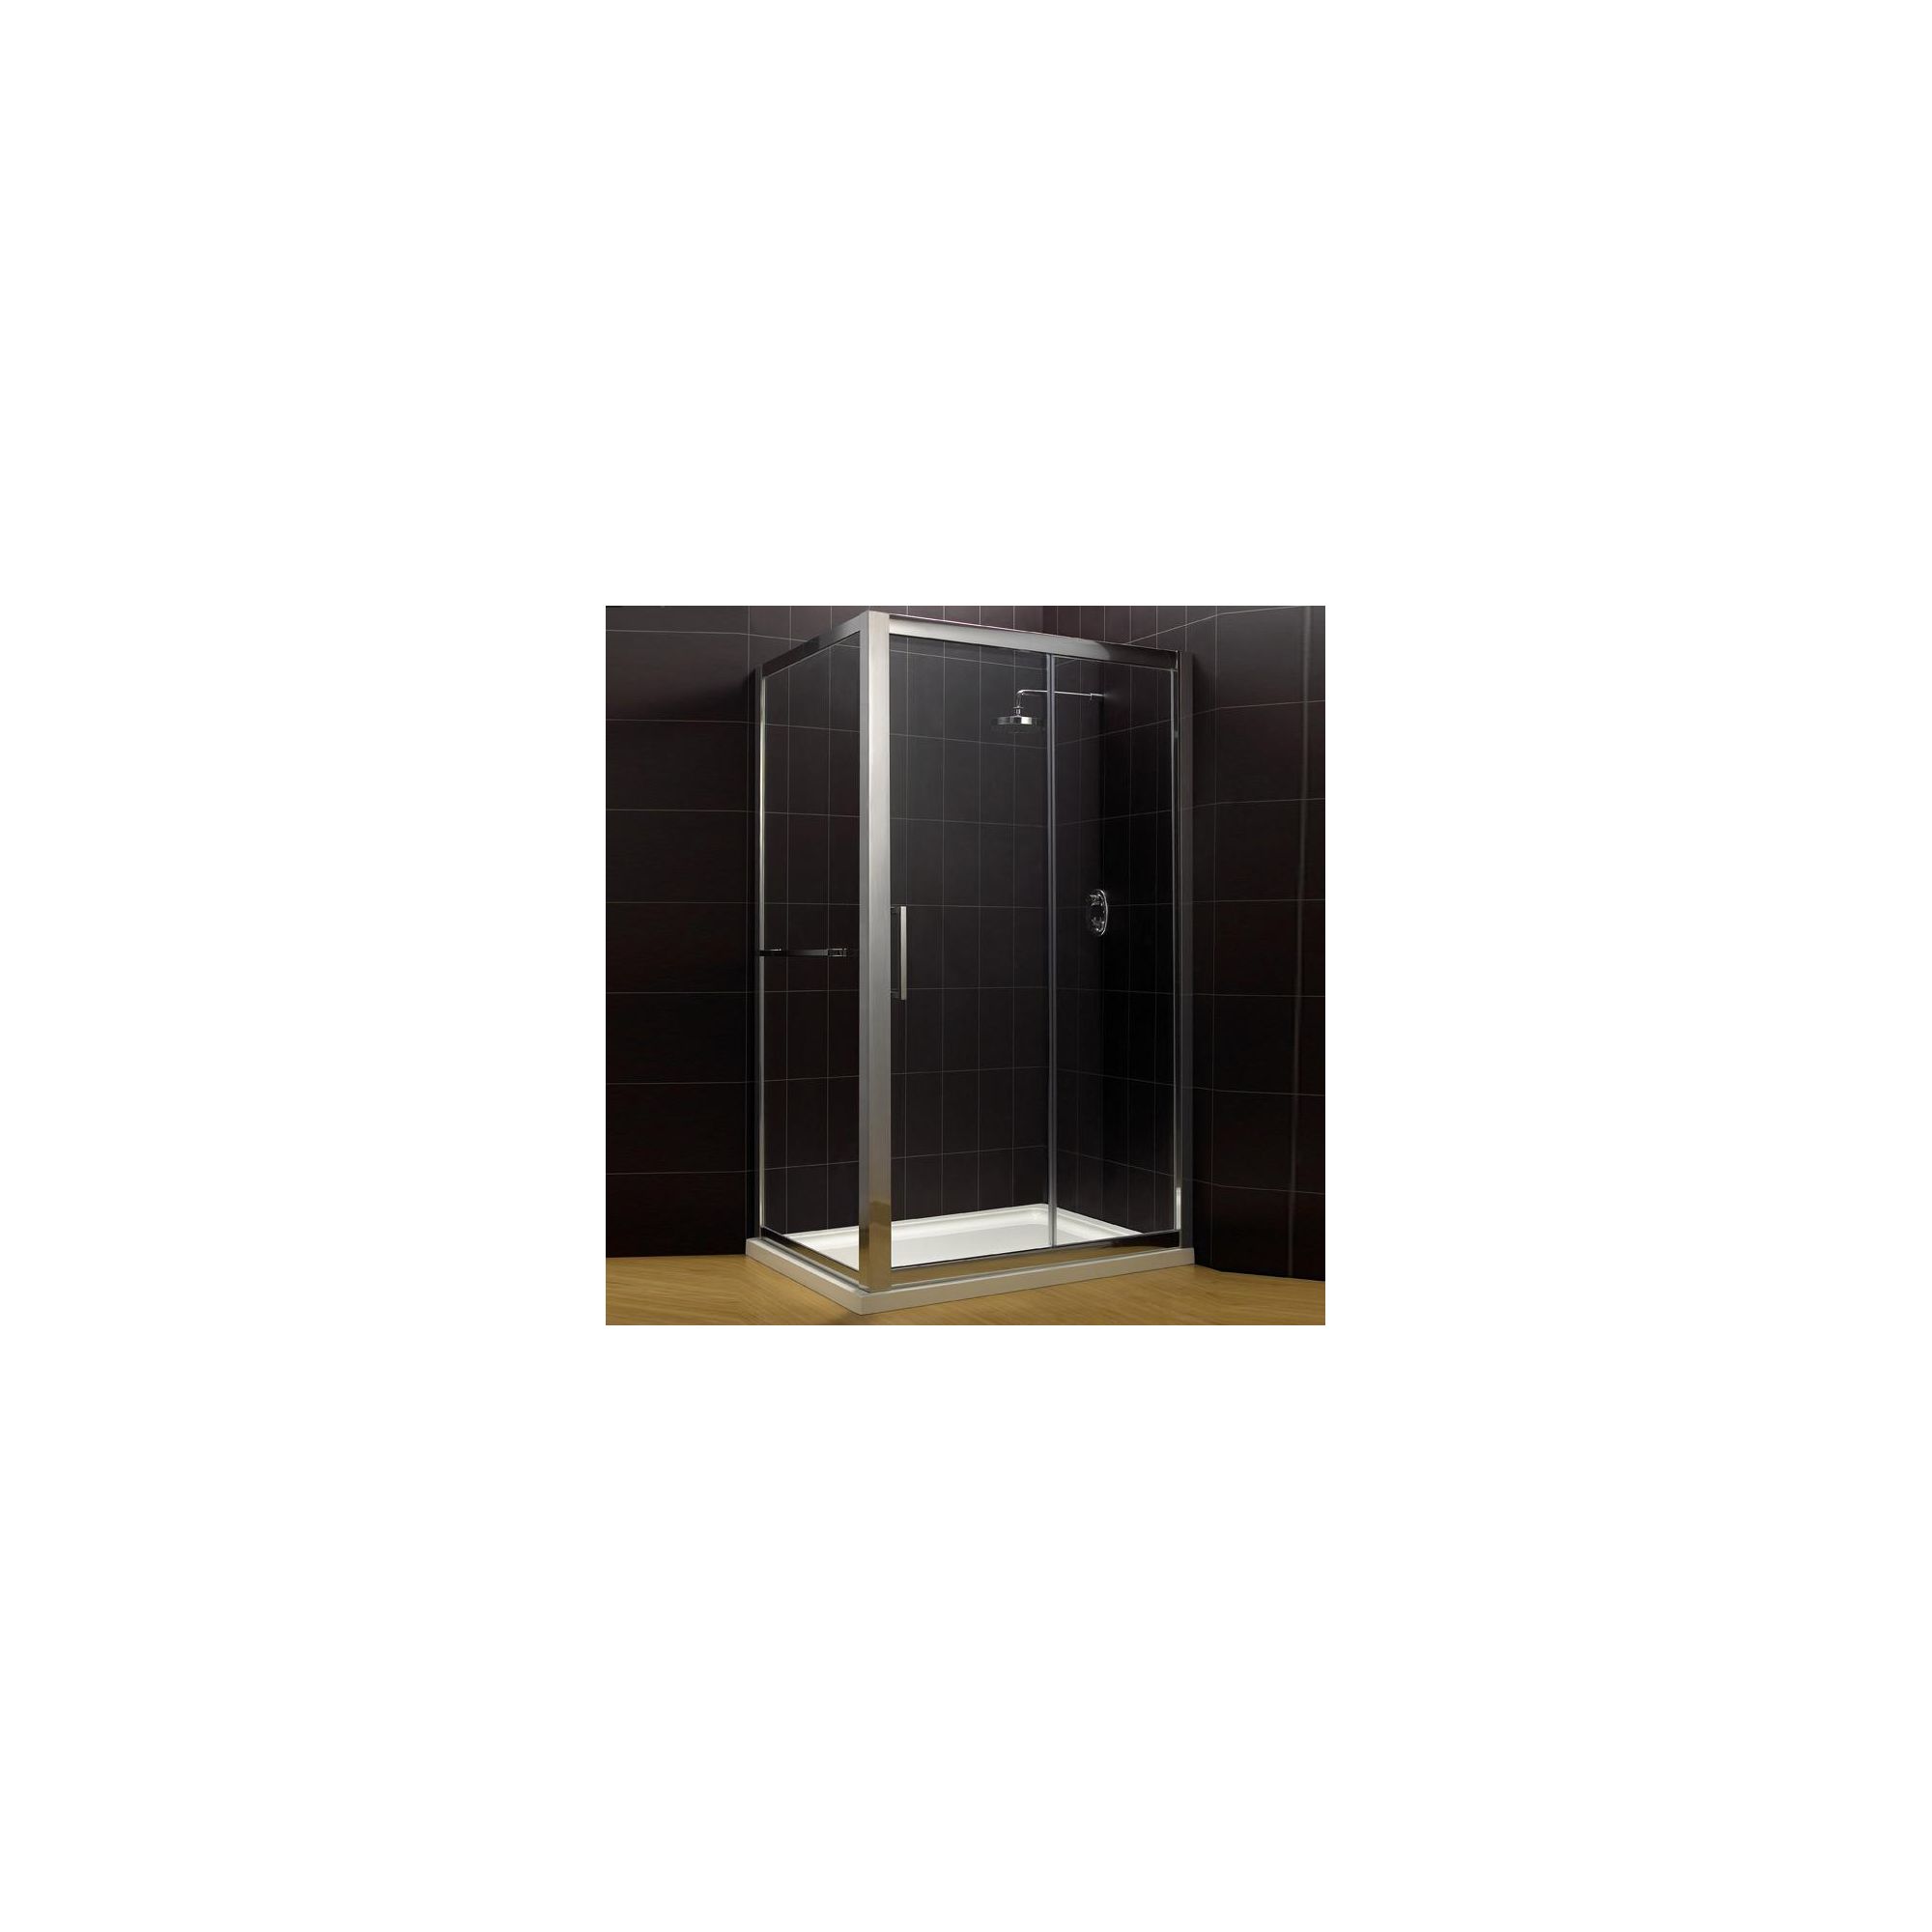 Duchy Supreme Silver Sliding Door Shower Enclosure, 1600mm x 900mm, Standard Tray, 8mm Glass at Tesco Direct